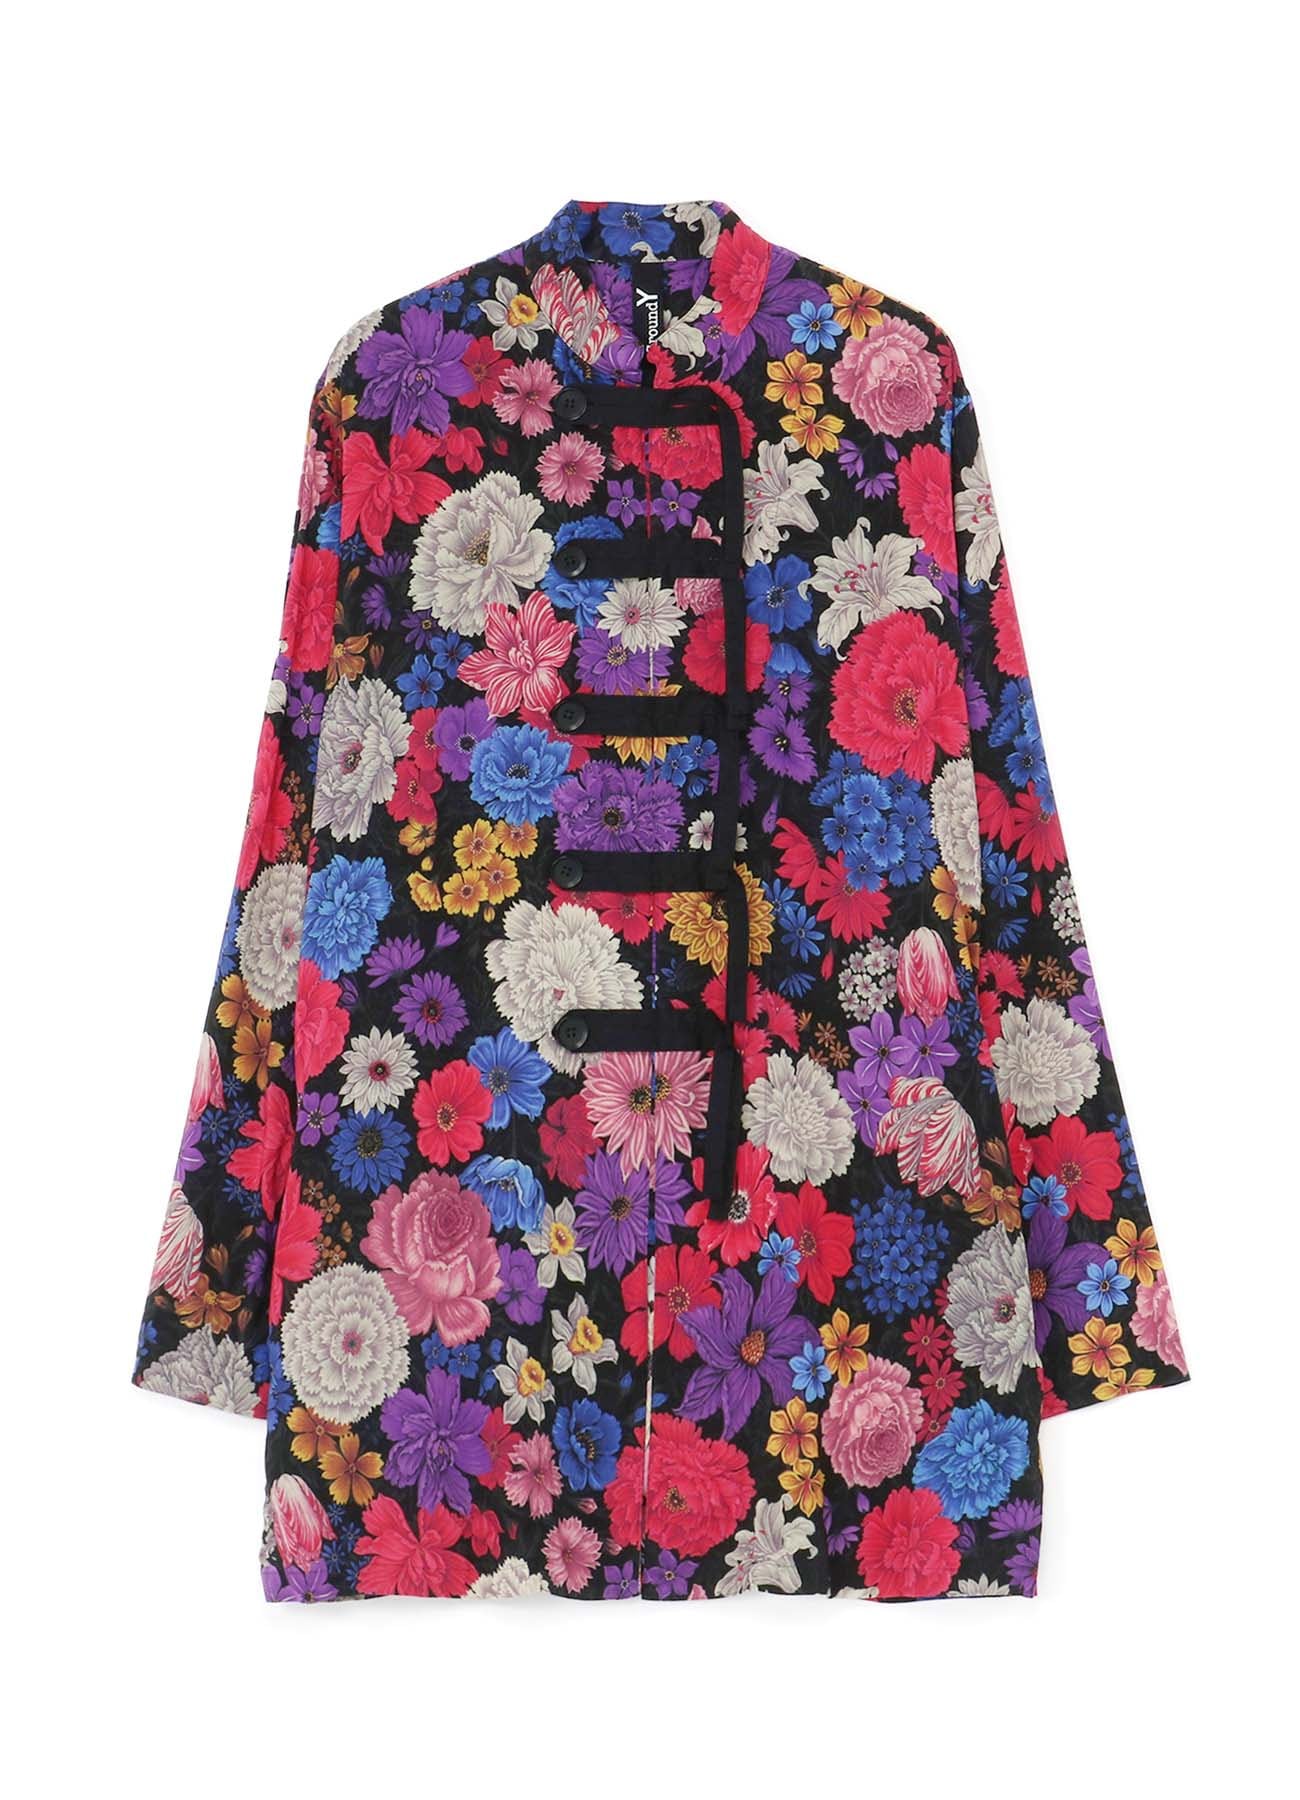 FLOWERS IN FULL BLOOM RAYON SHIRT